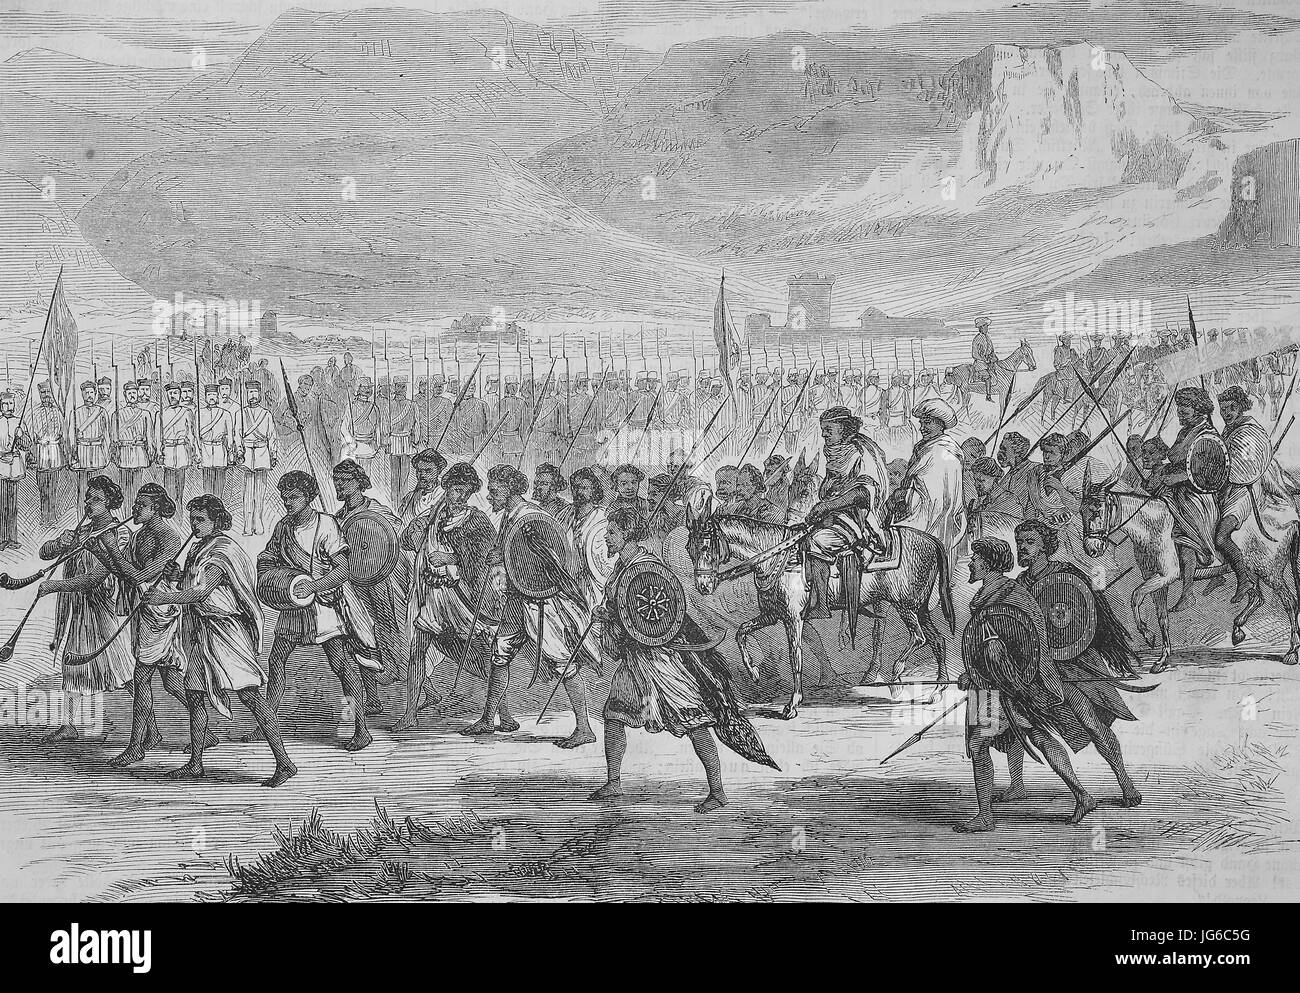 Digital improved:, Abyssinian expedition of 1868, arriving of Kassa von Tirge at the english soldier camp, illustration from the 19th century Stock Photo